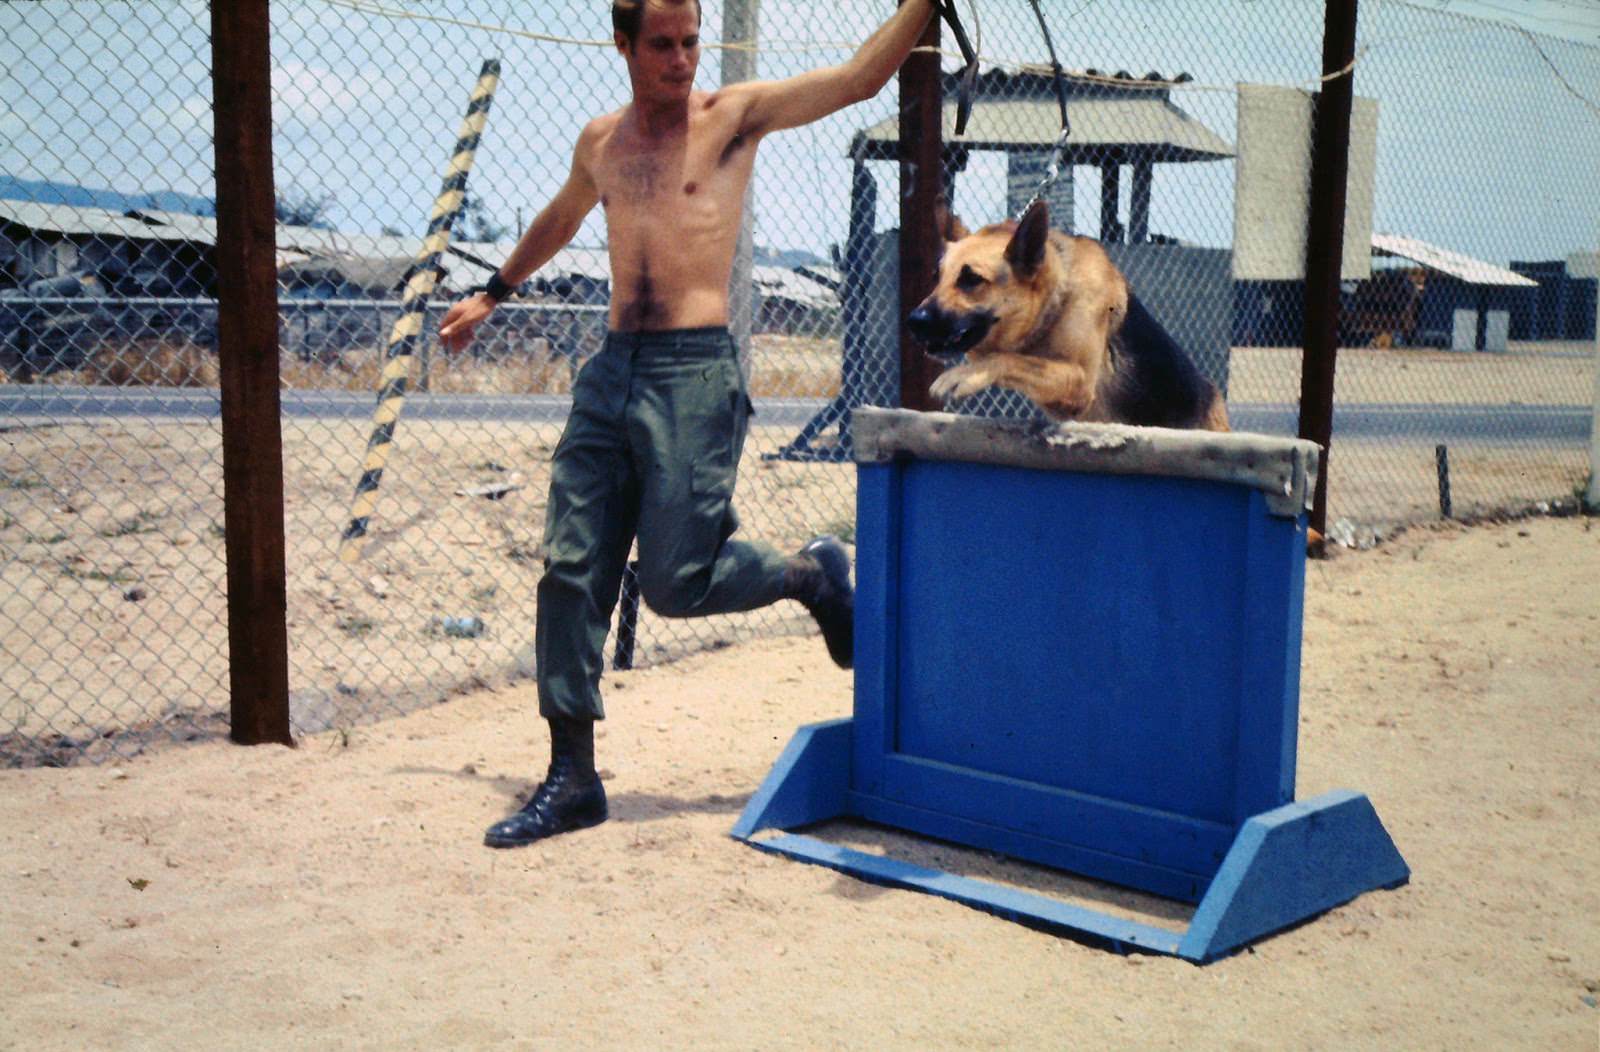 Brian Mowatt and his sentry dog, Prince, running the exercise course at the Army sentry dog kennels. Nha Trang, Vietnam.